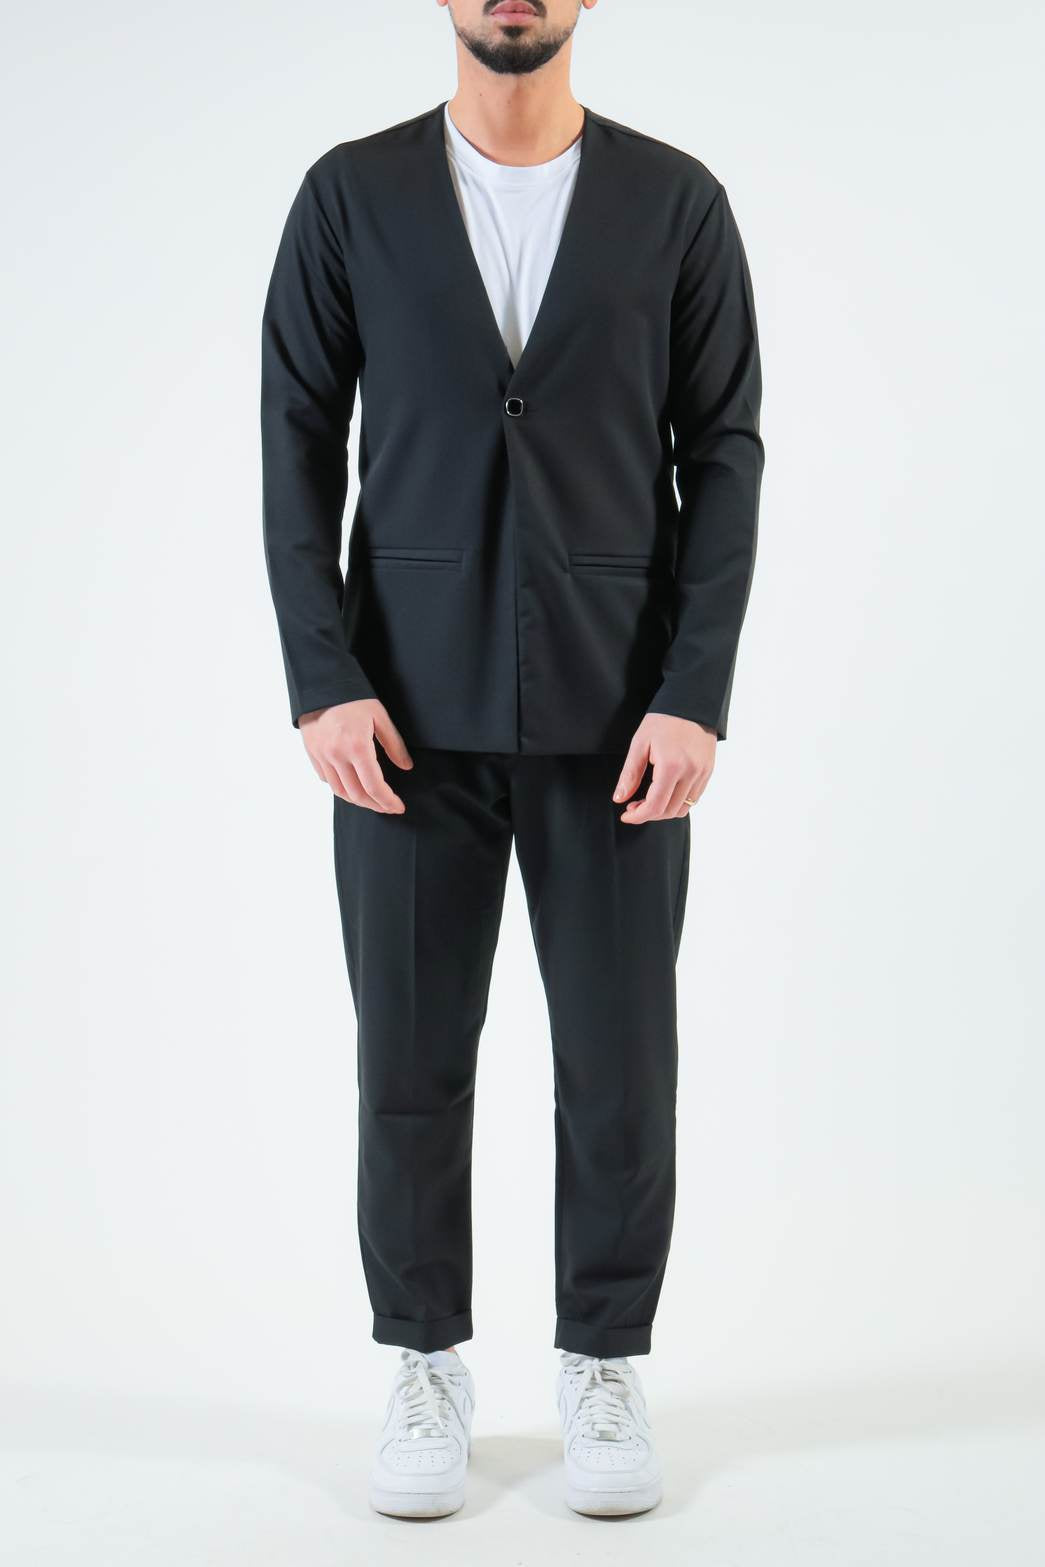 the brothers coordset giacca+pant gioiello